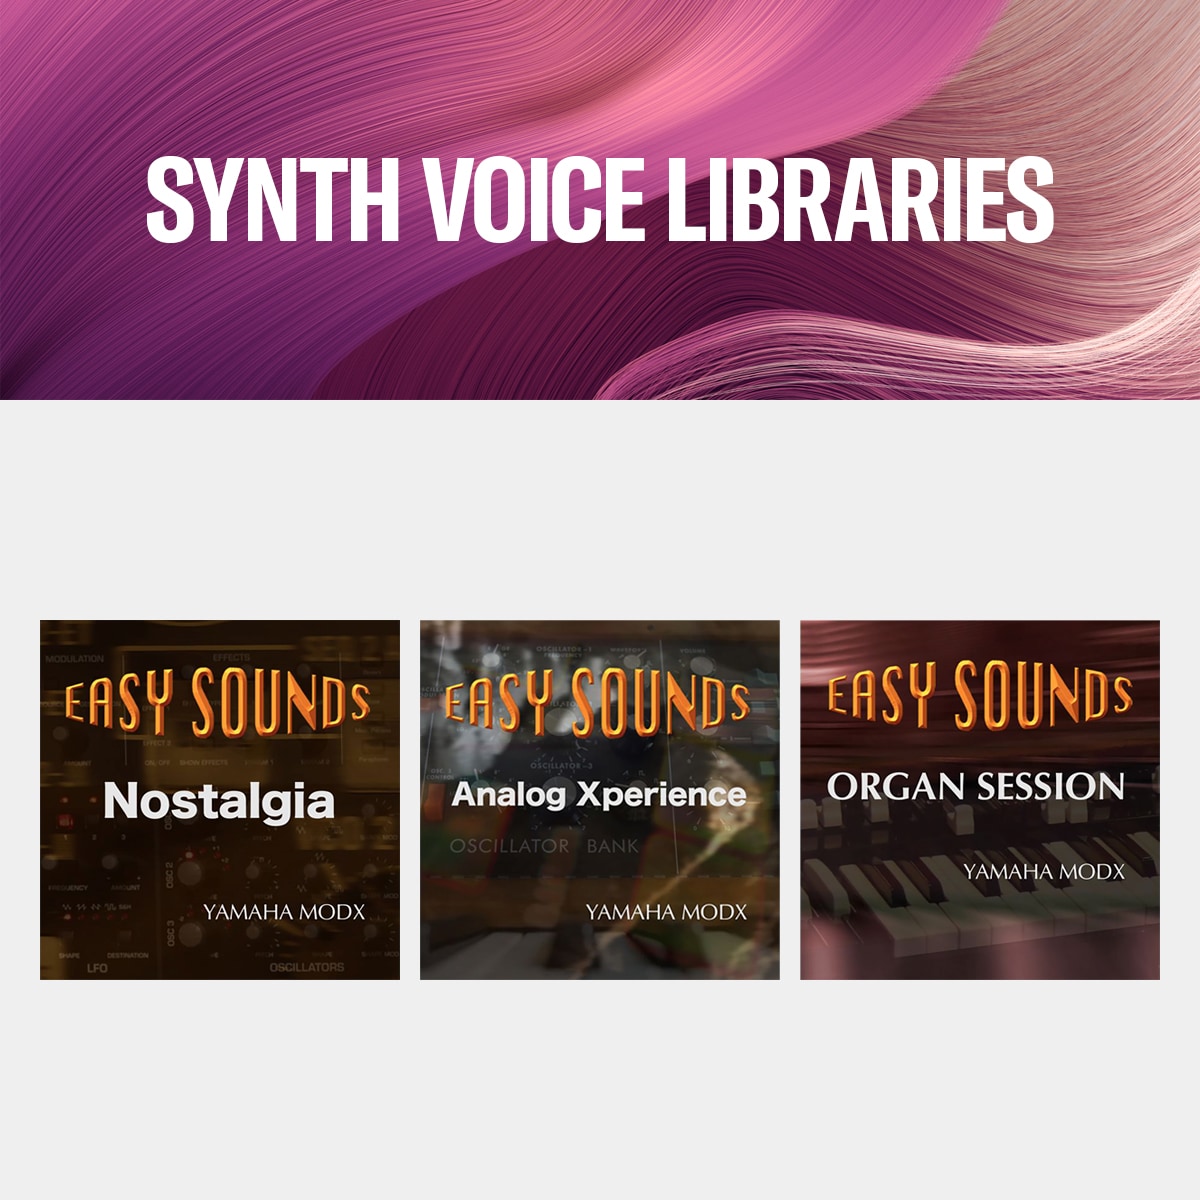 Synth Voice Libraries